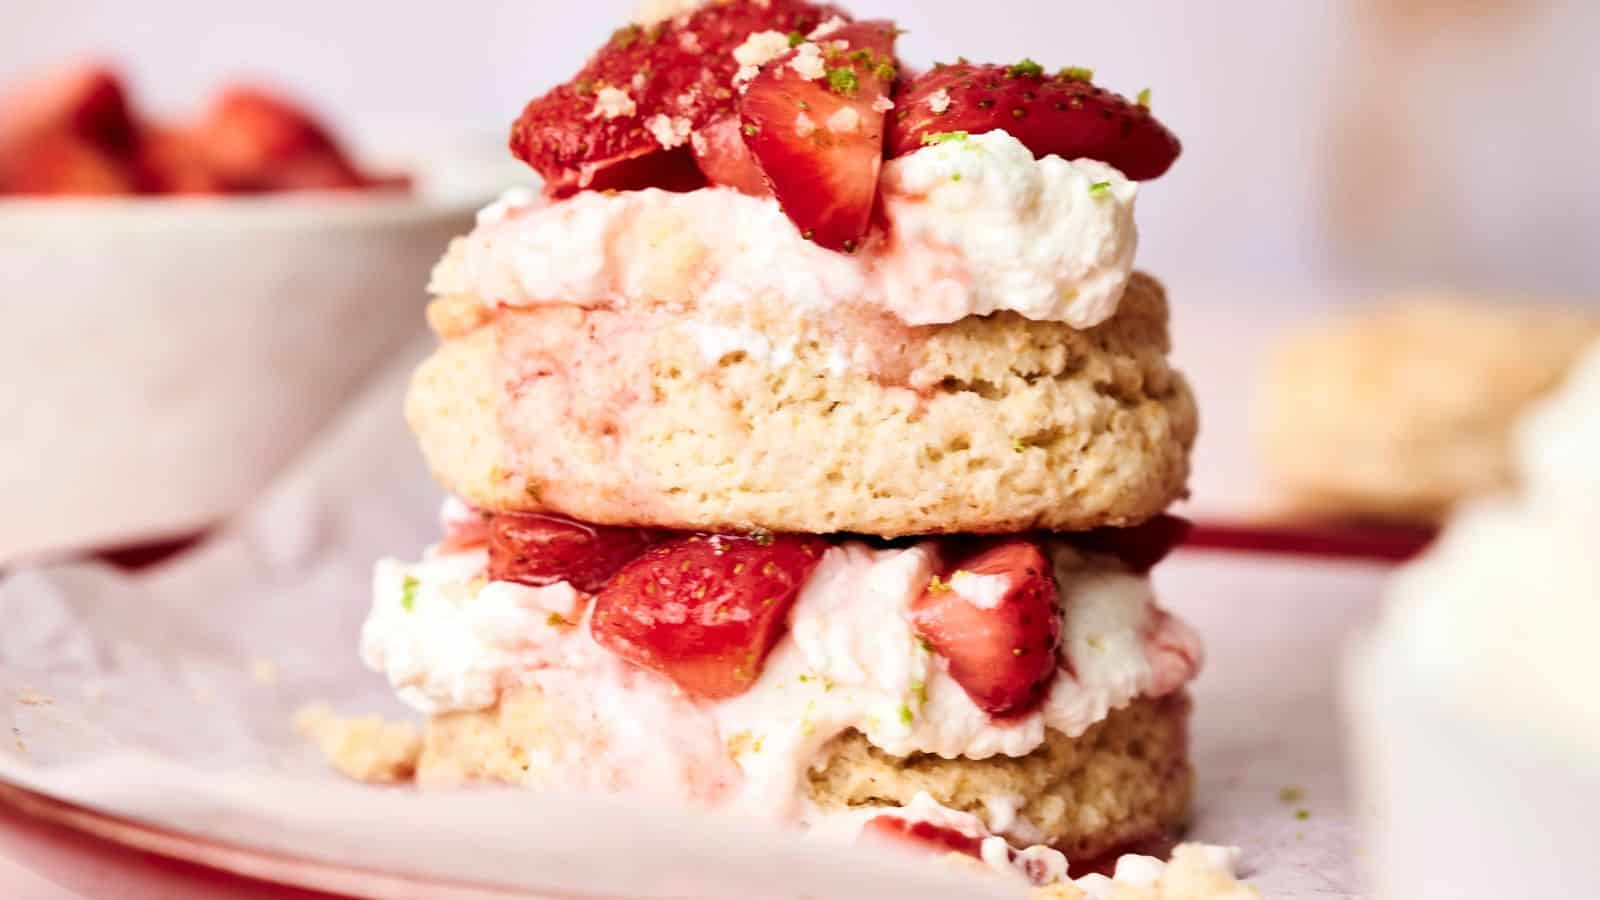 A close-up of a delectable strawberry shortcake reveals layers of biscuit, whipped cream, and fresh strawberry pieces on a plate. In the background, a bowl of strawberries enhances the sweet temptation.